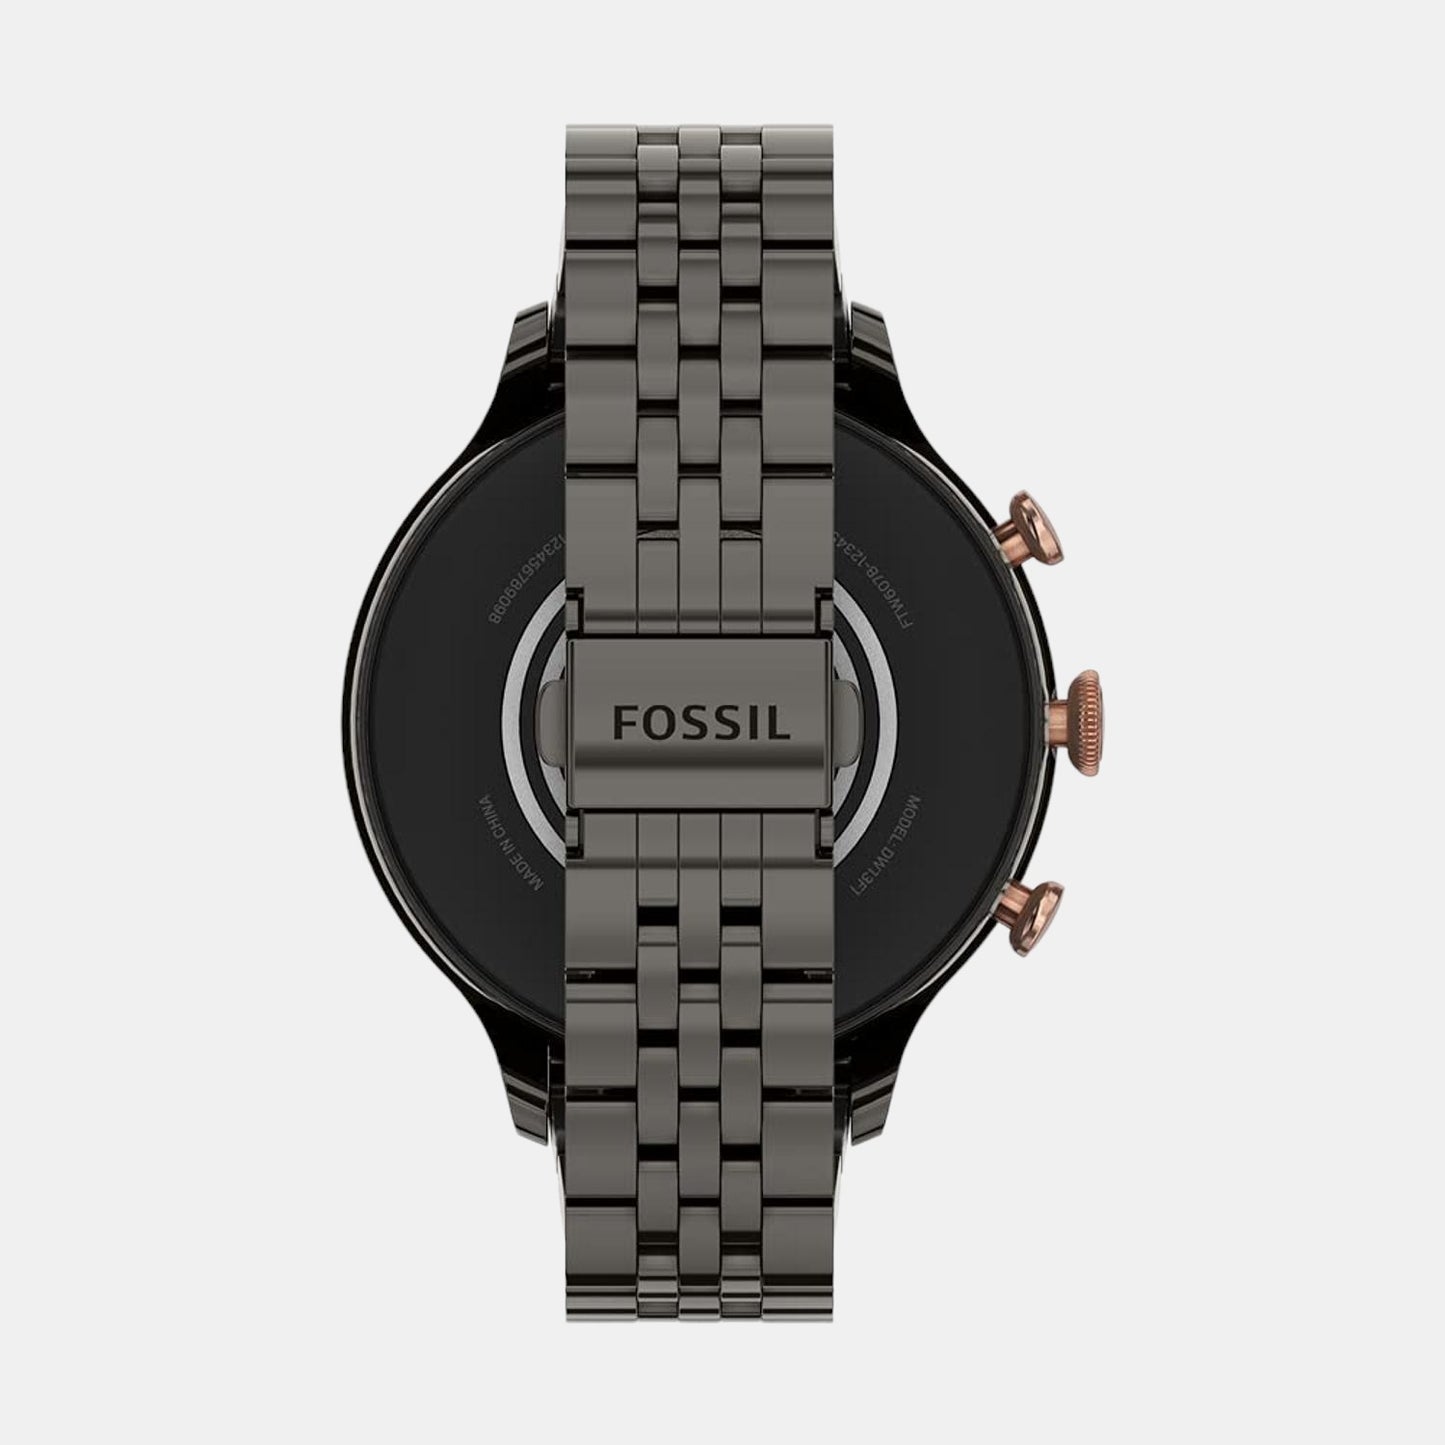 fossil-stainless-steel-full-color-display-digital-women-smart-watch-ftw6078